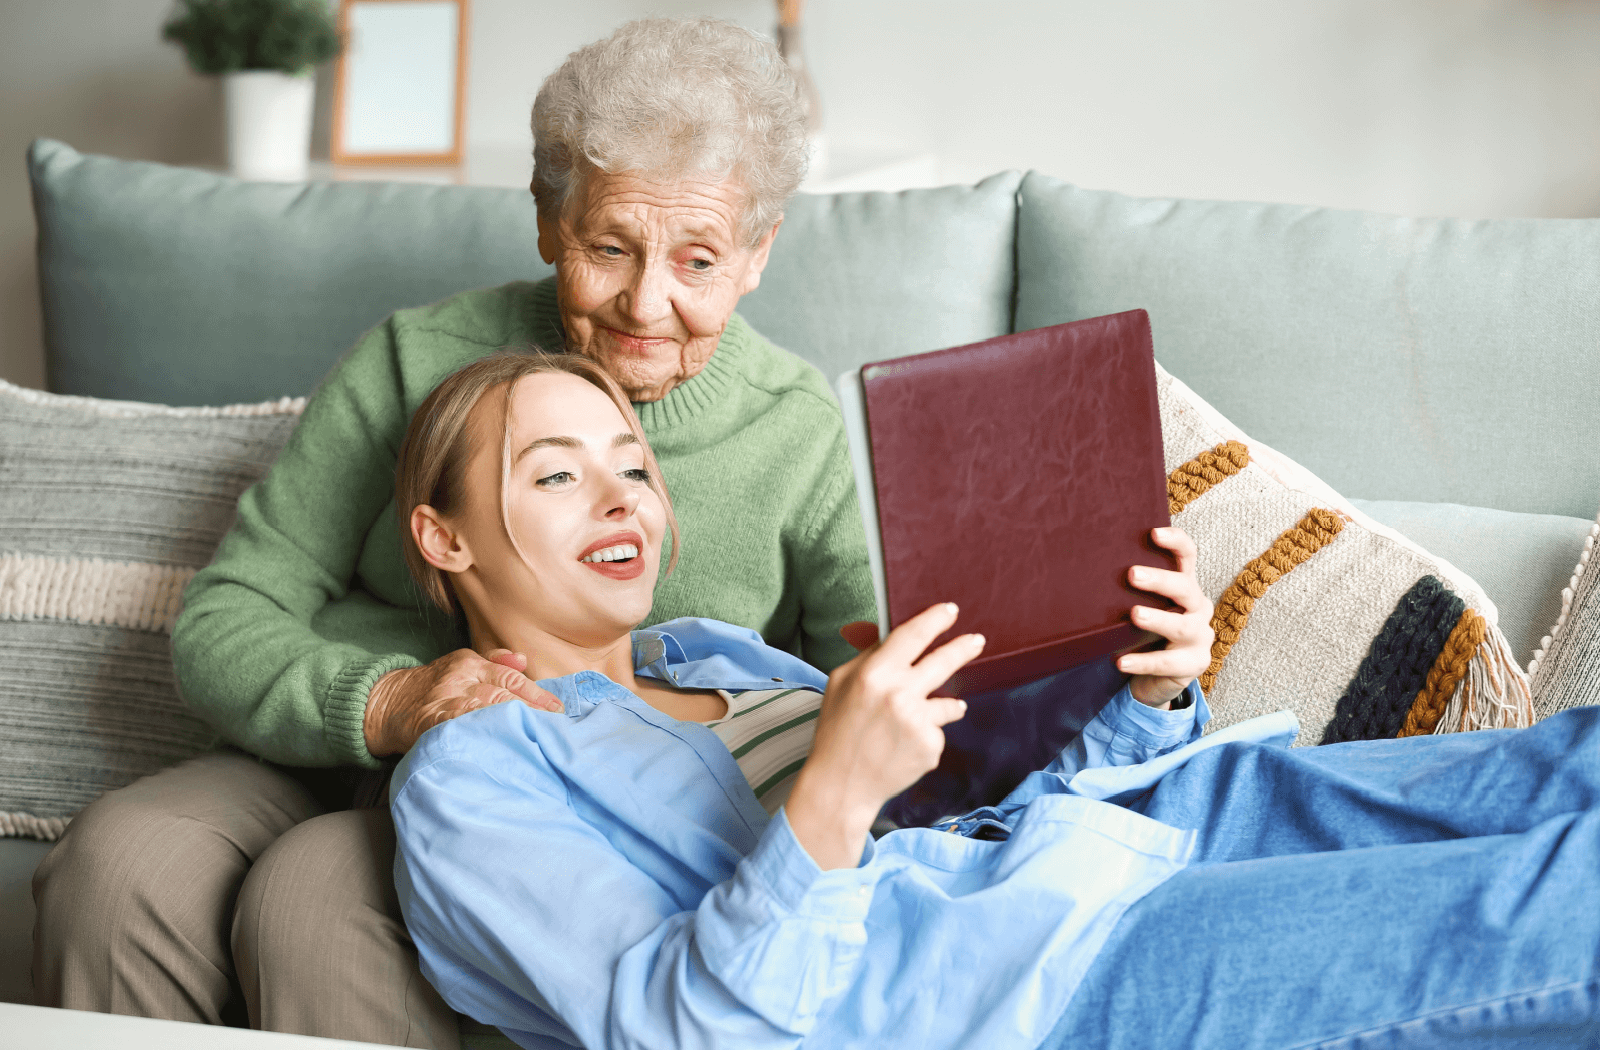 A young adult lays in their grandparent's lap on the couch as they flip through a photo album together